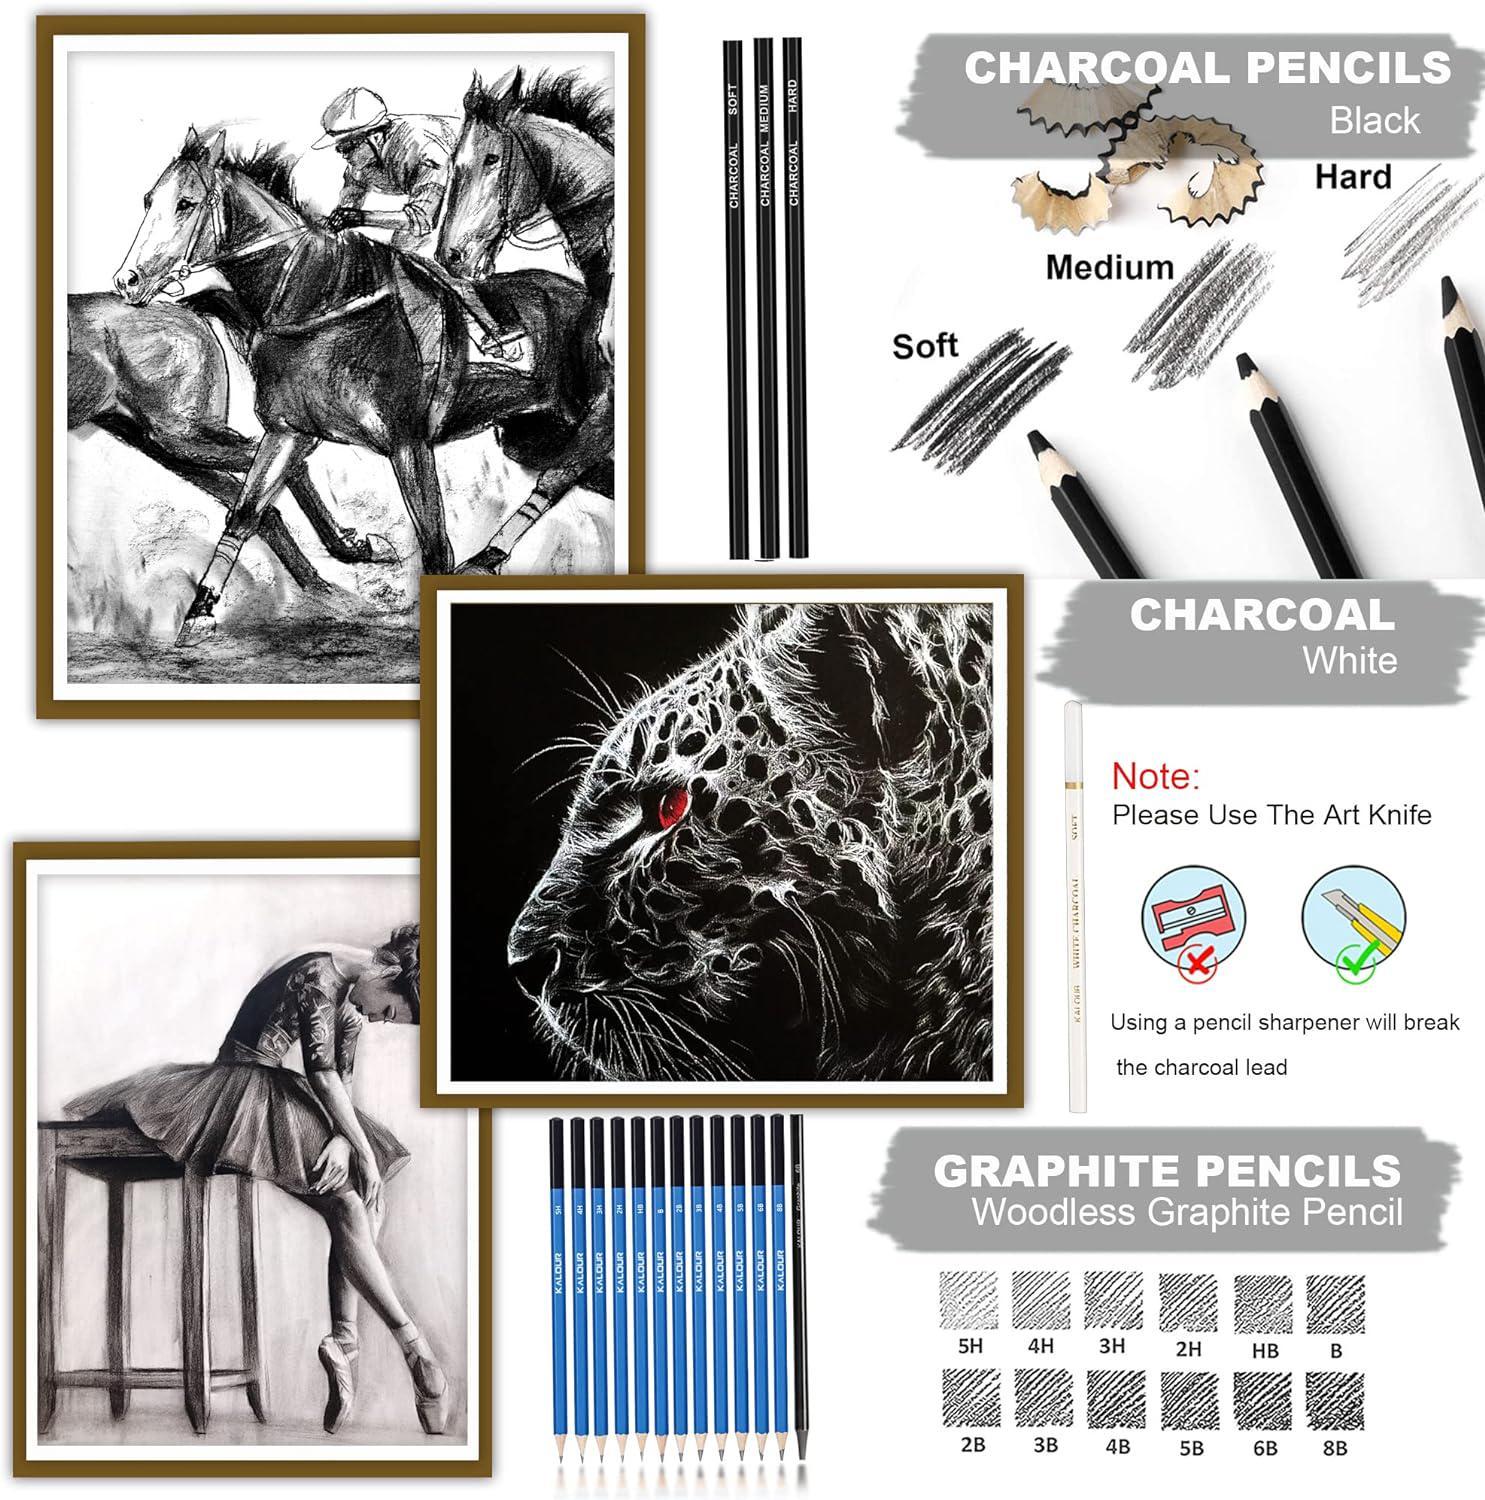  Qionew Sketch Pencils for Drawing,12 Pack Drawing Pencils, Art  Pencils, Graphite Pencils, Art Pencils for Drawing and Shading, Sketching,  Artist Pencils for Beginners & Pro Artists : Arts, Crafts 